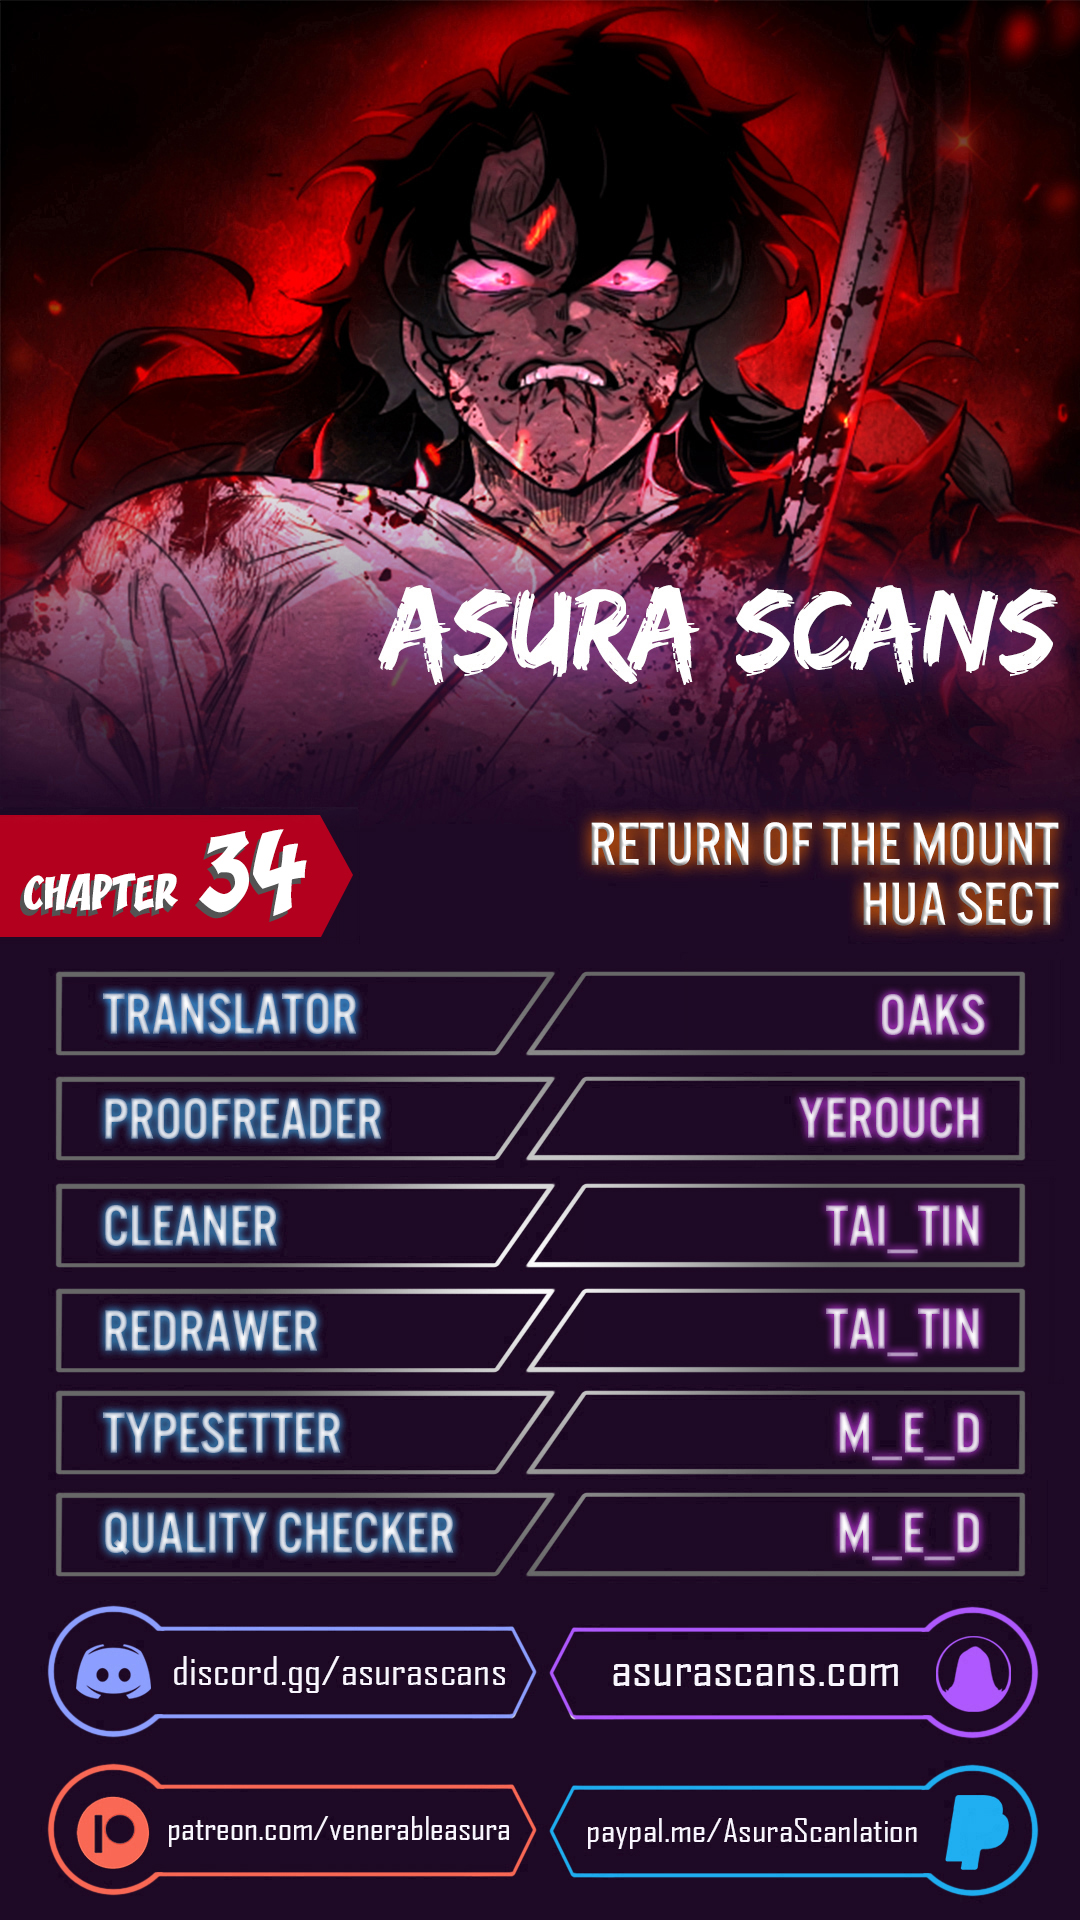 Return of the Mount Hua Sect - Chapter 11658 - Image 1